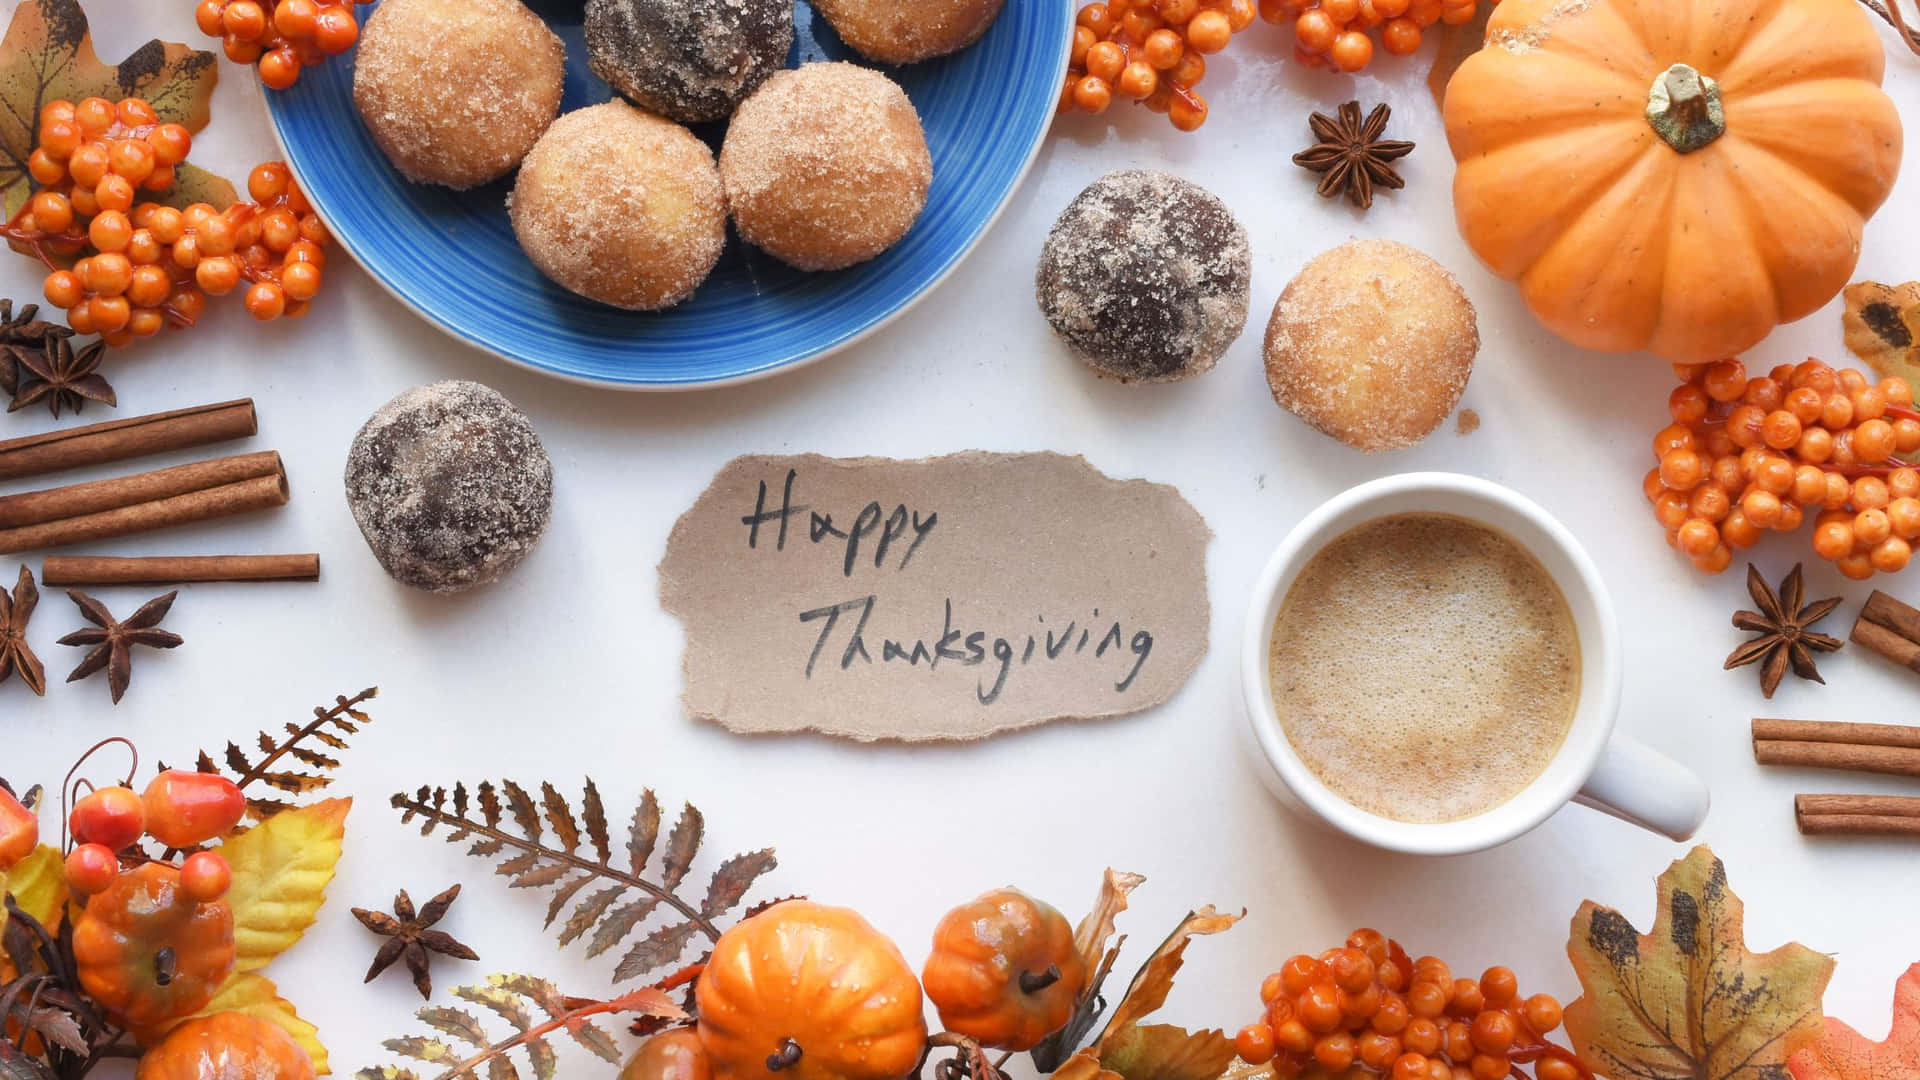 A Cup Of Coffee And Donuts With The Words Happy Thanksgiving Wallpaper